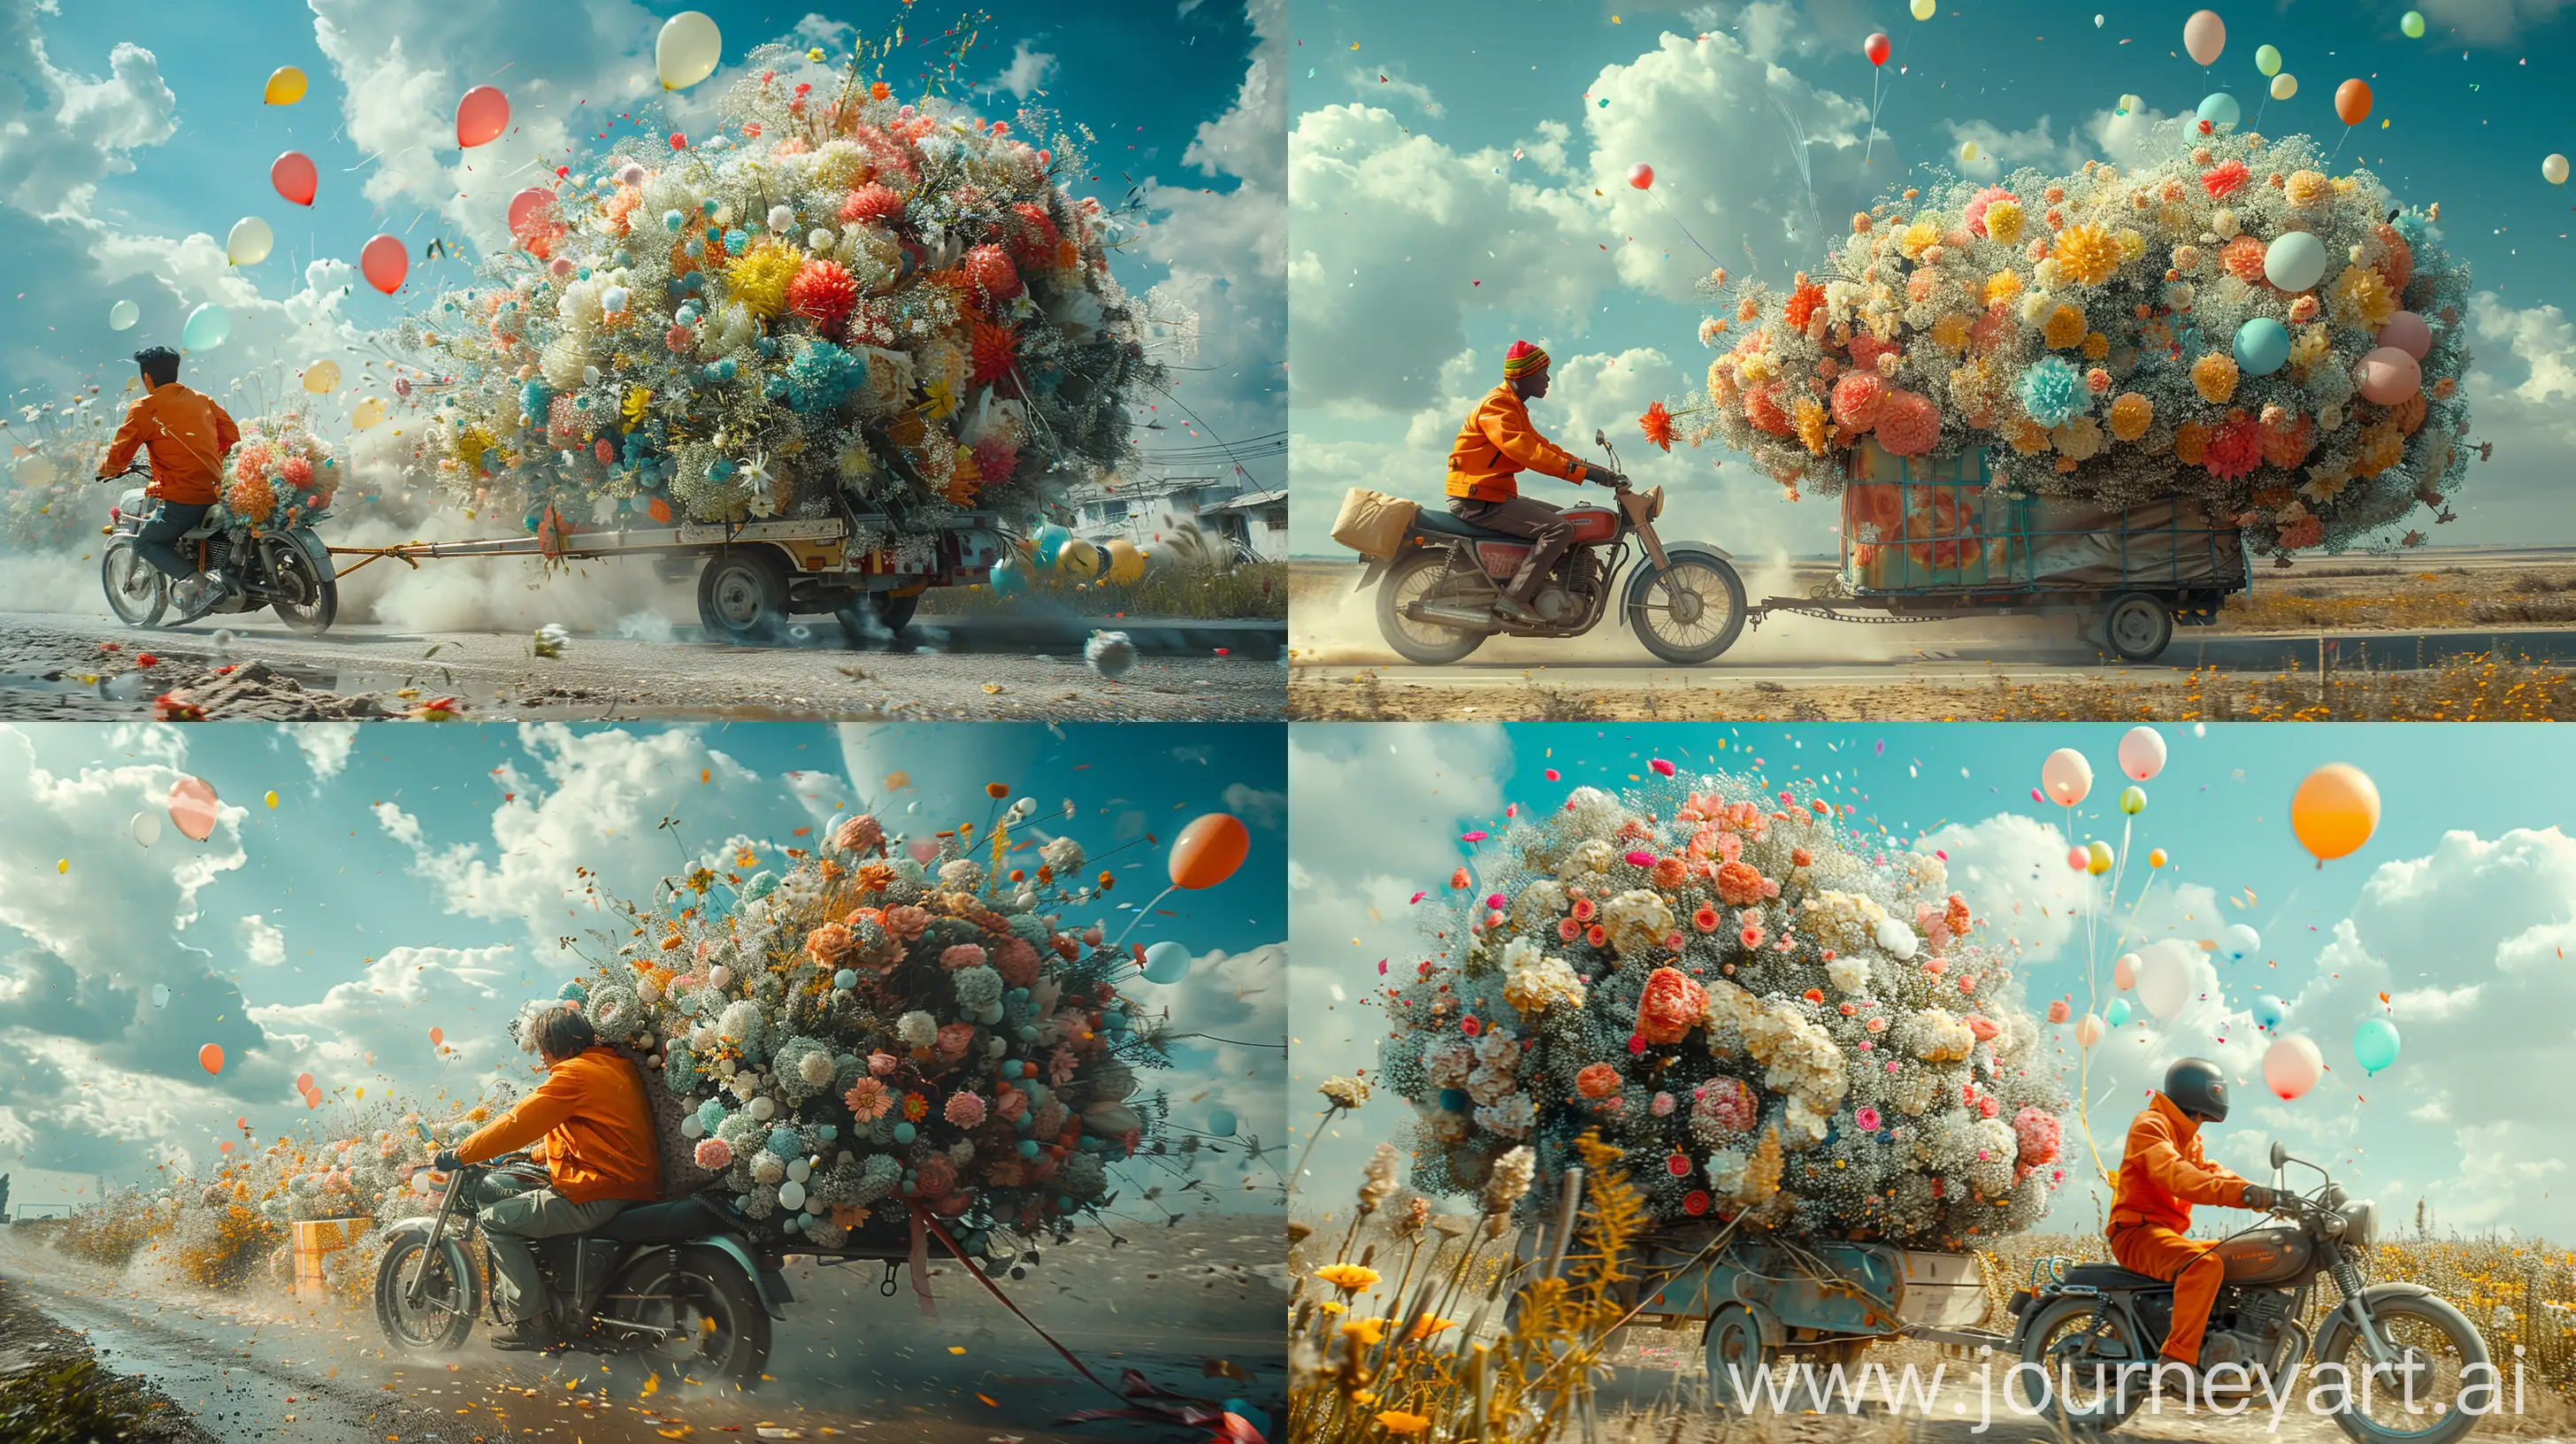 Man-Riding-Motorcycle-with-Flower-Bouquet-and-Giant-Gift-Trailer